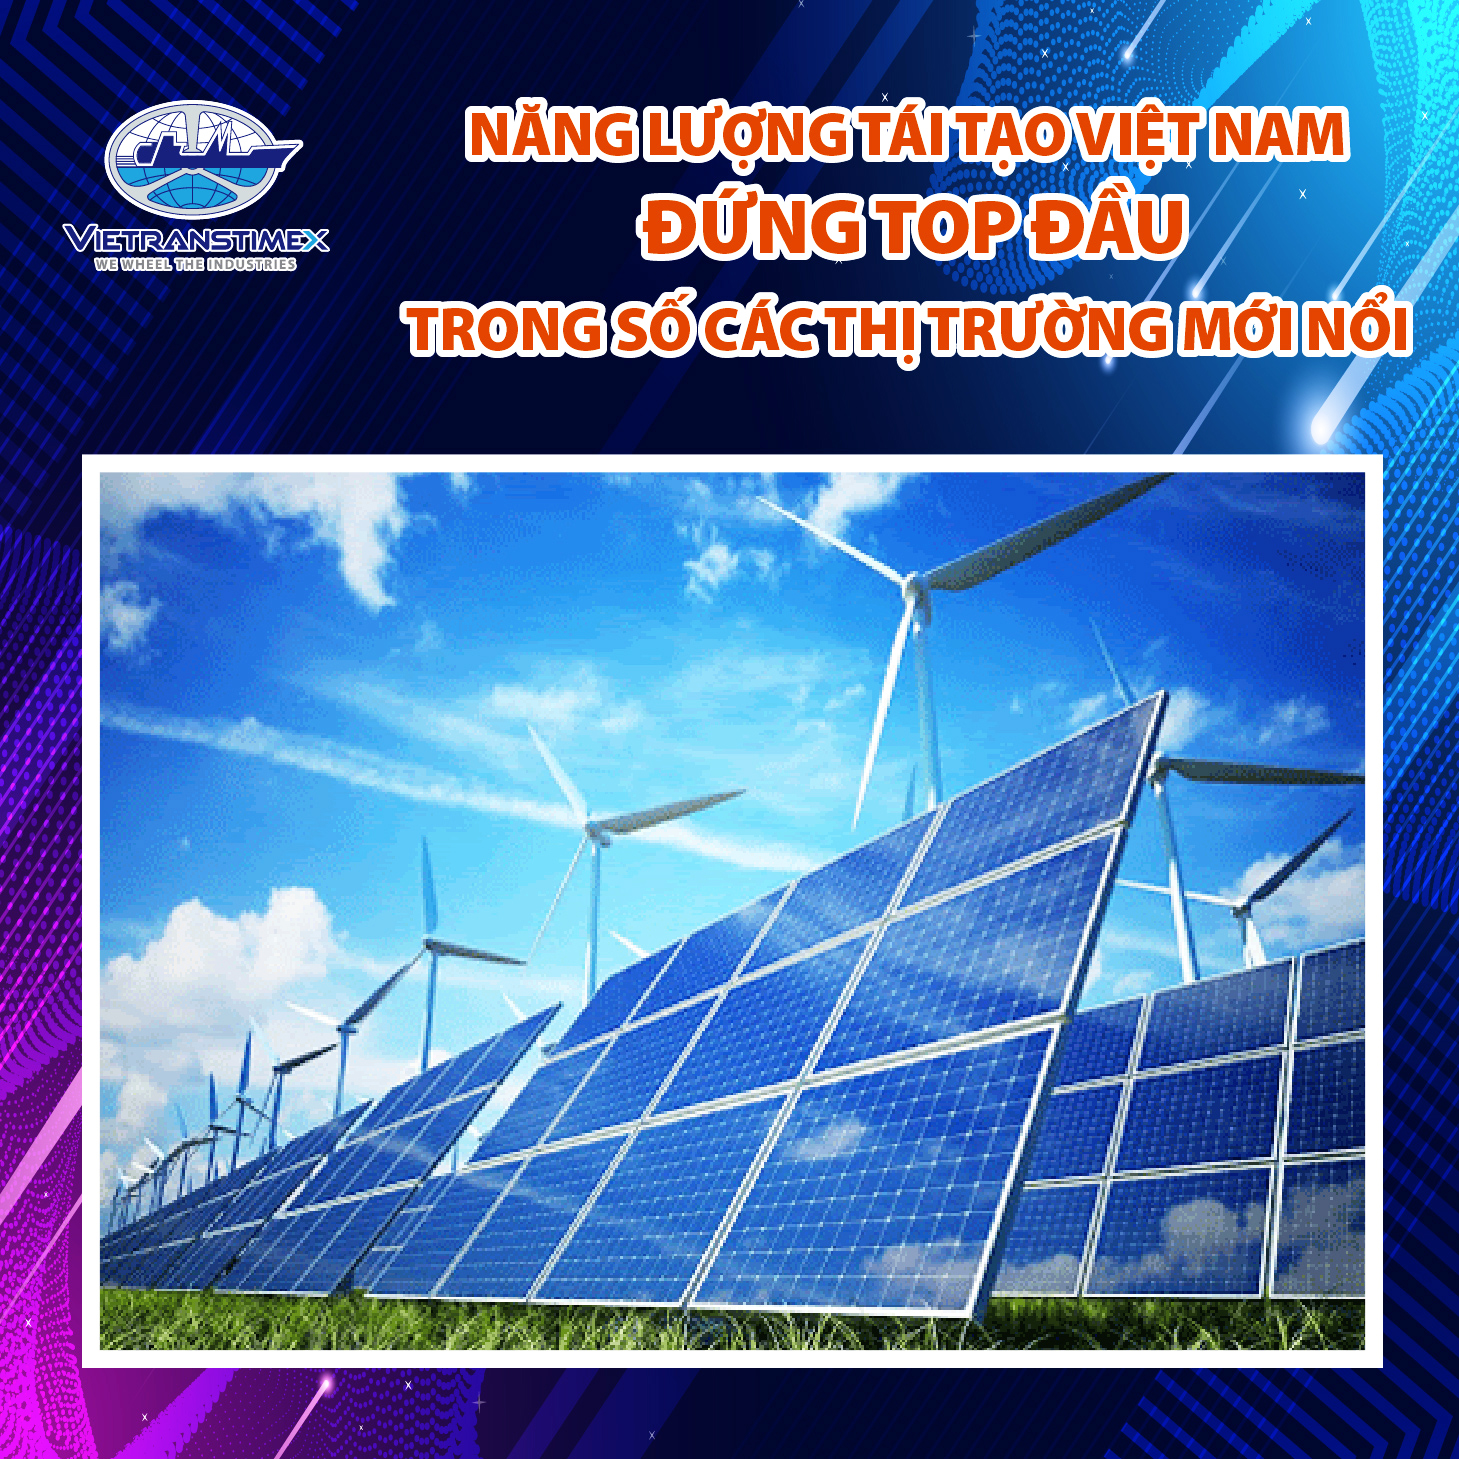 Vietnam Among Top Three Leading Nations In Renewable Energy Shift In Asia Pacific